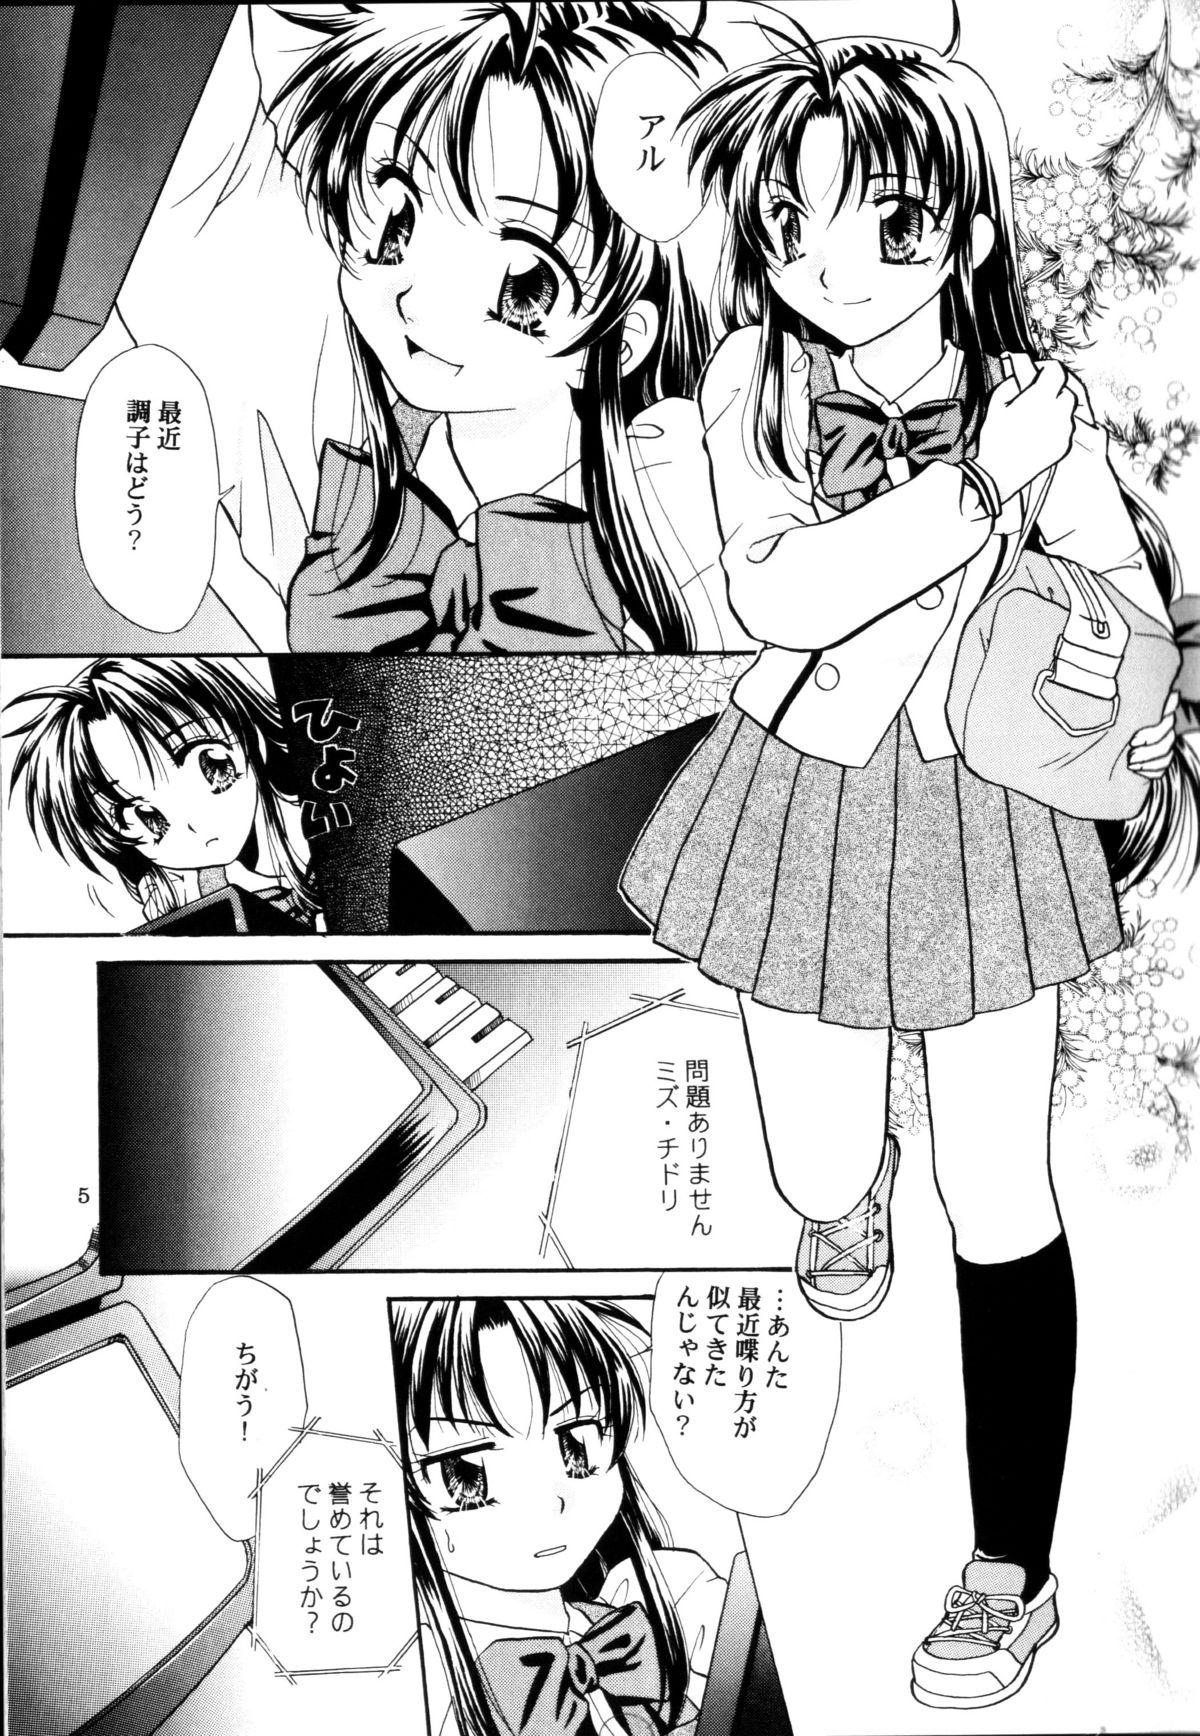 Bisex A.I. - Full metal panic Abuse - Page 4